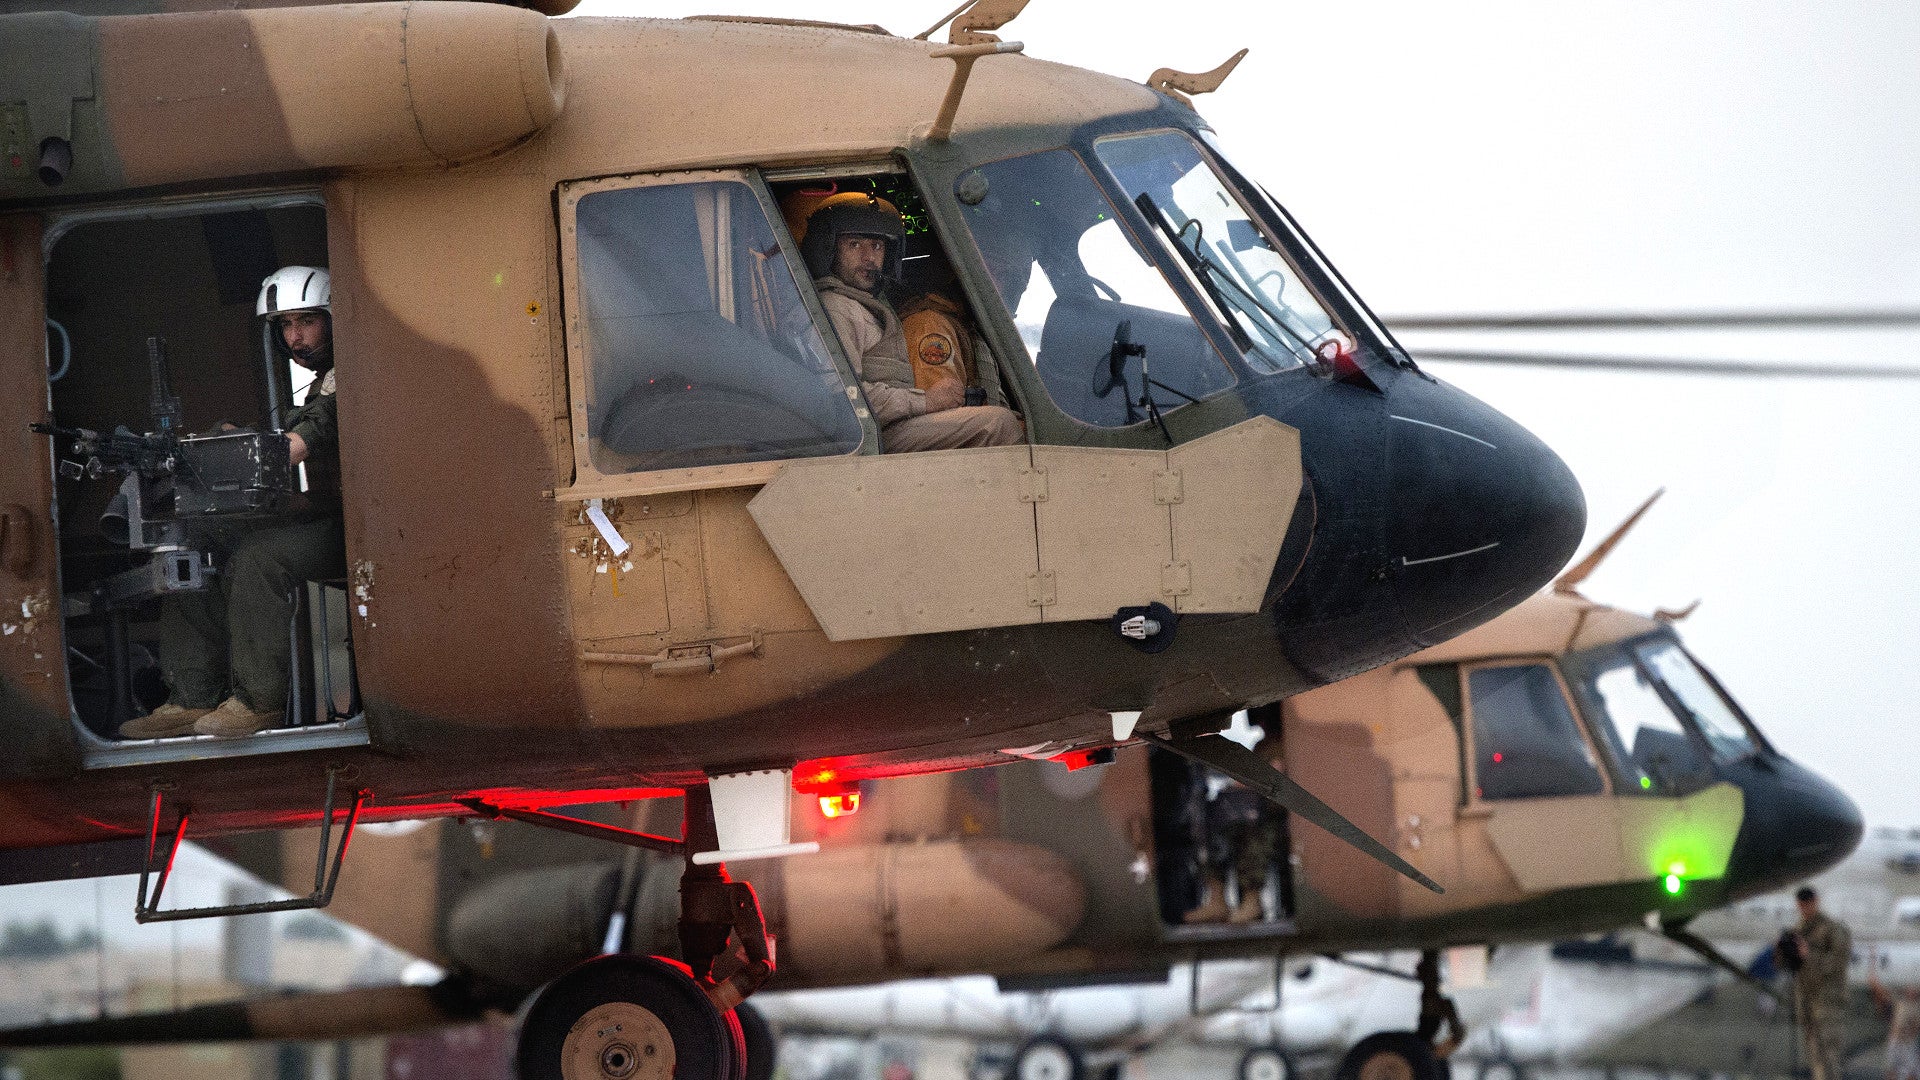 https://www.thedrive.com/content/2021/11/afghan-mi-17s.jpg?quality=85&amp;width=1920&amp;quality=70